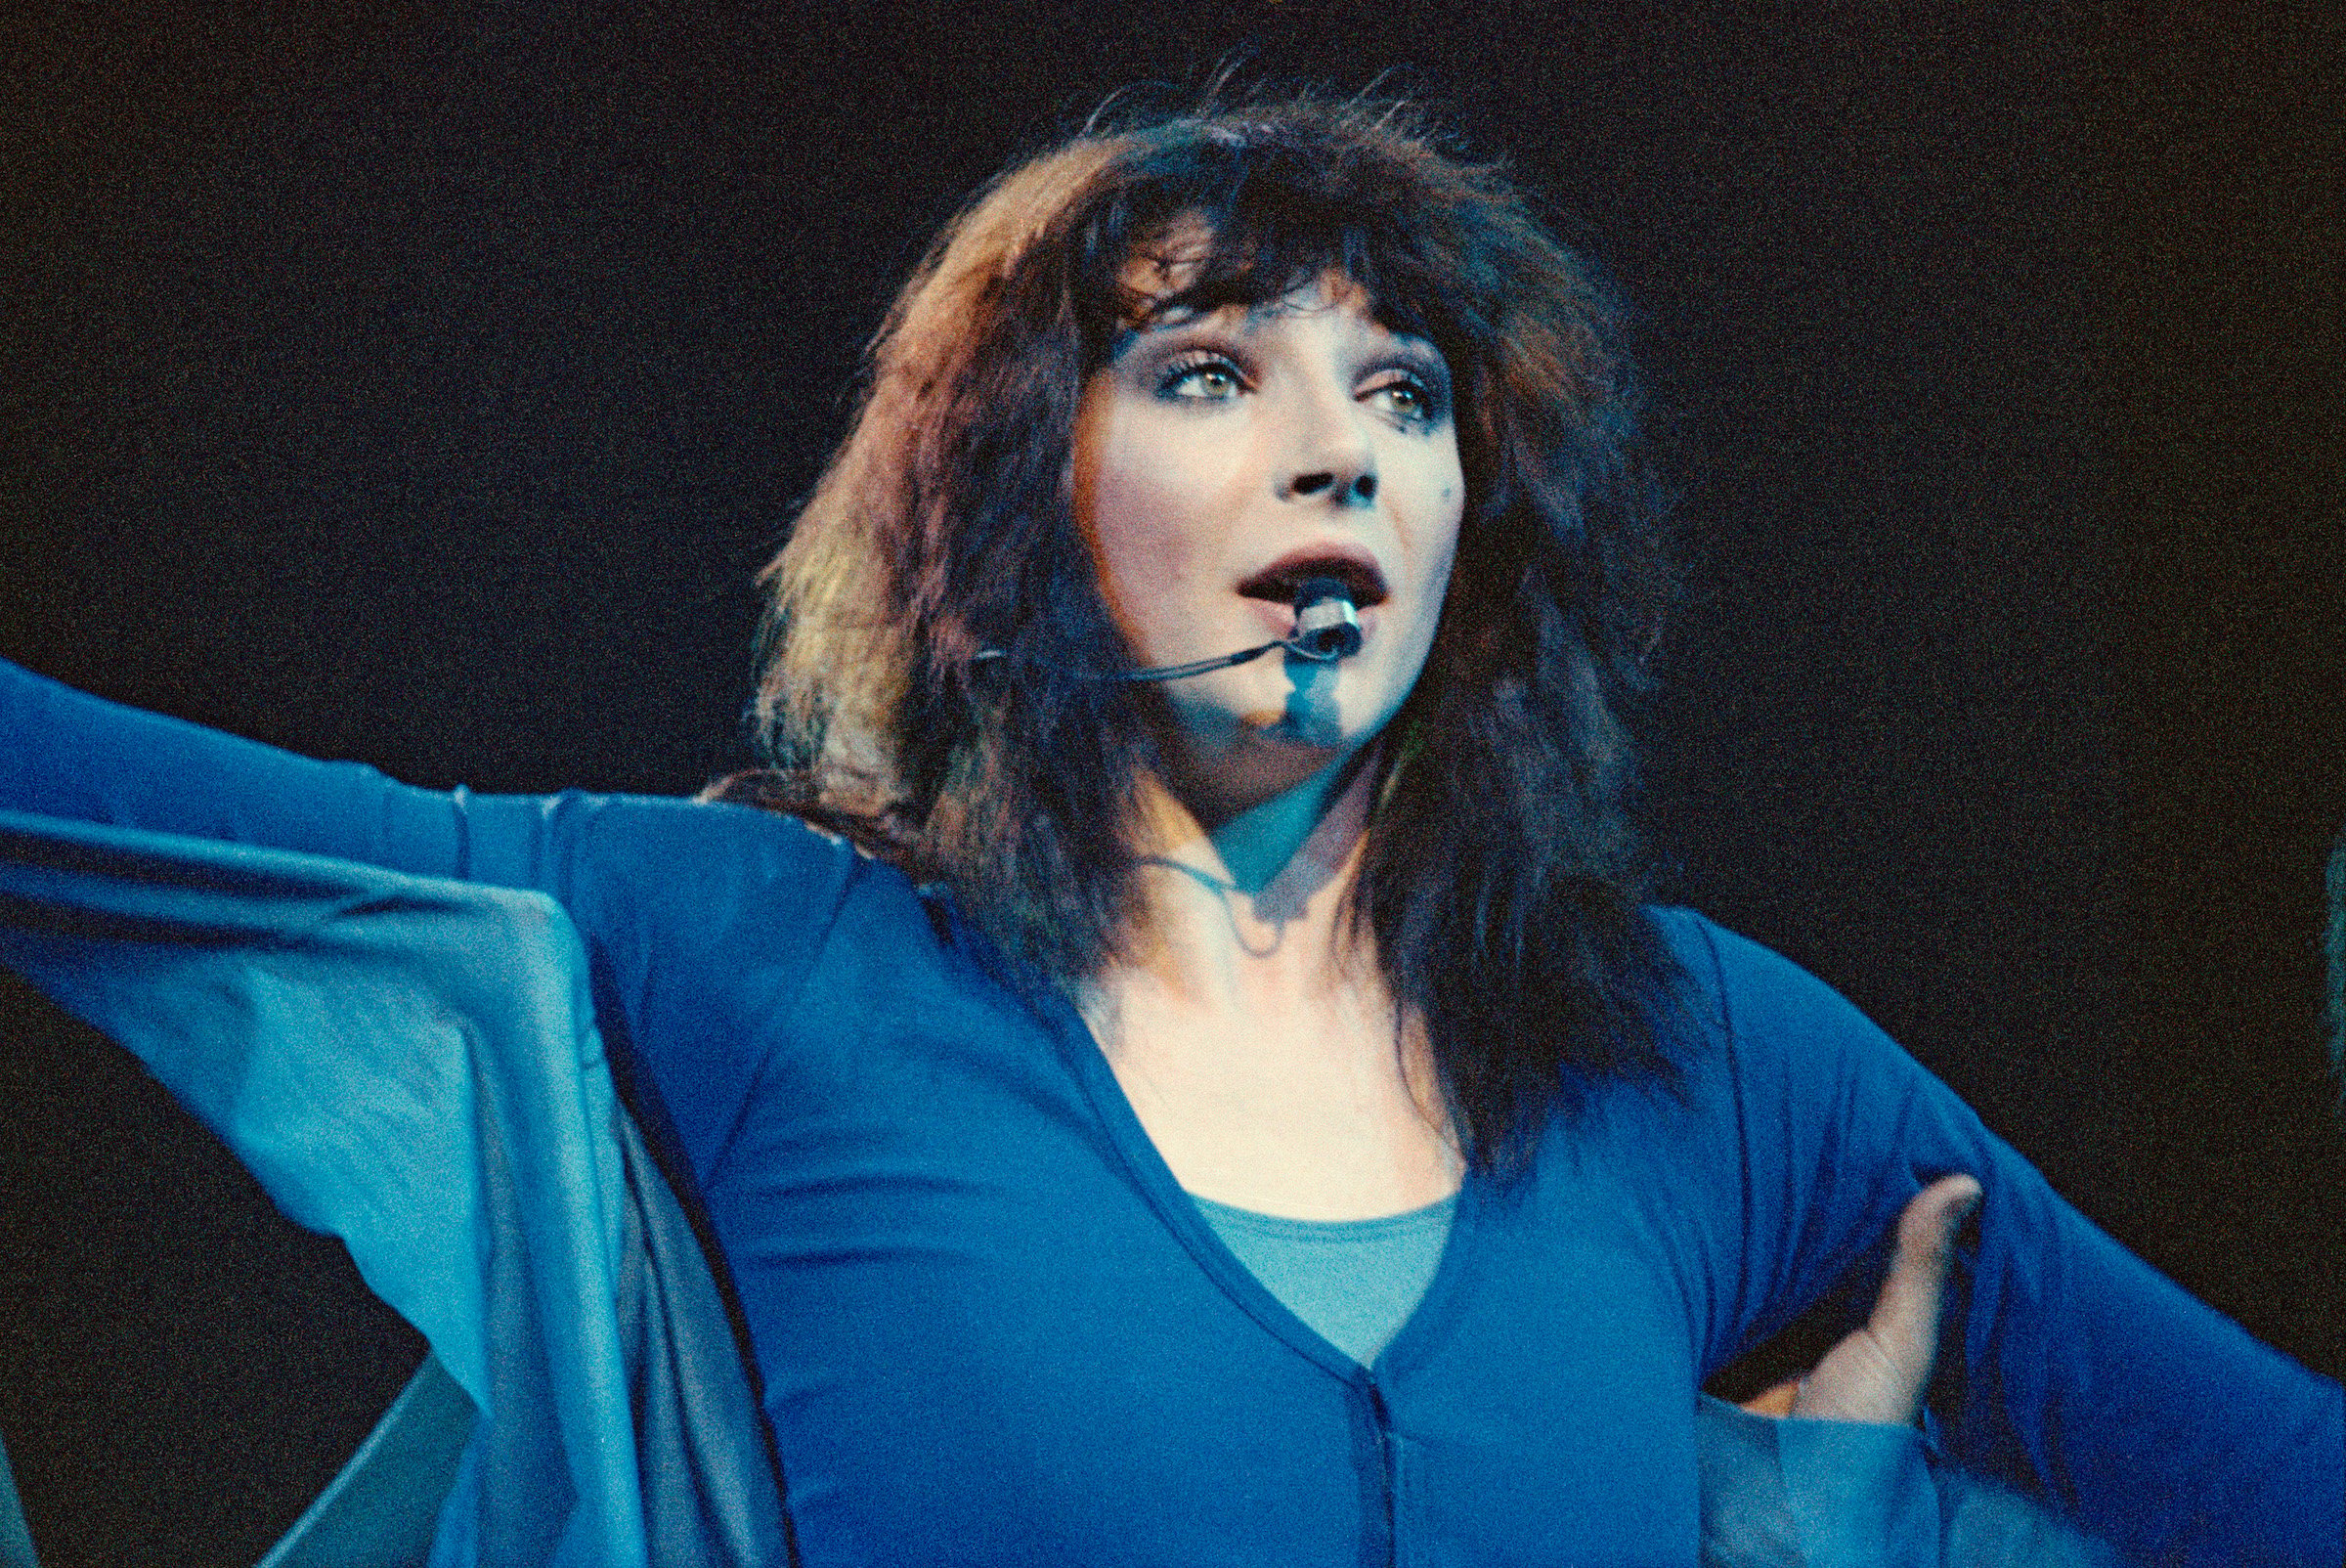 Kate Bush, whose song was featured on 'Stranger Things,' performing wearing blue